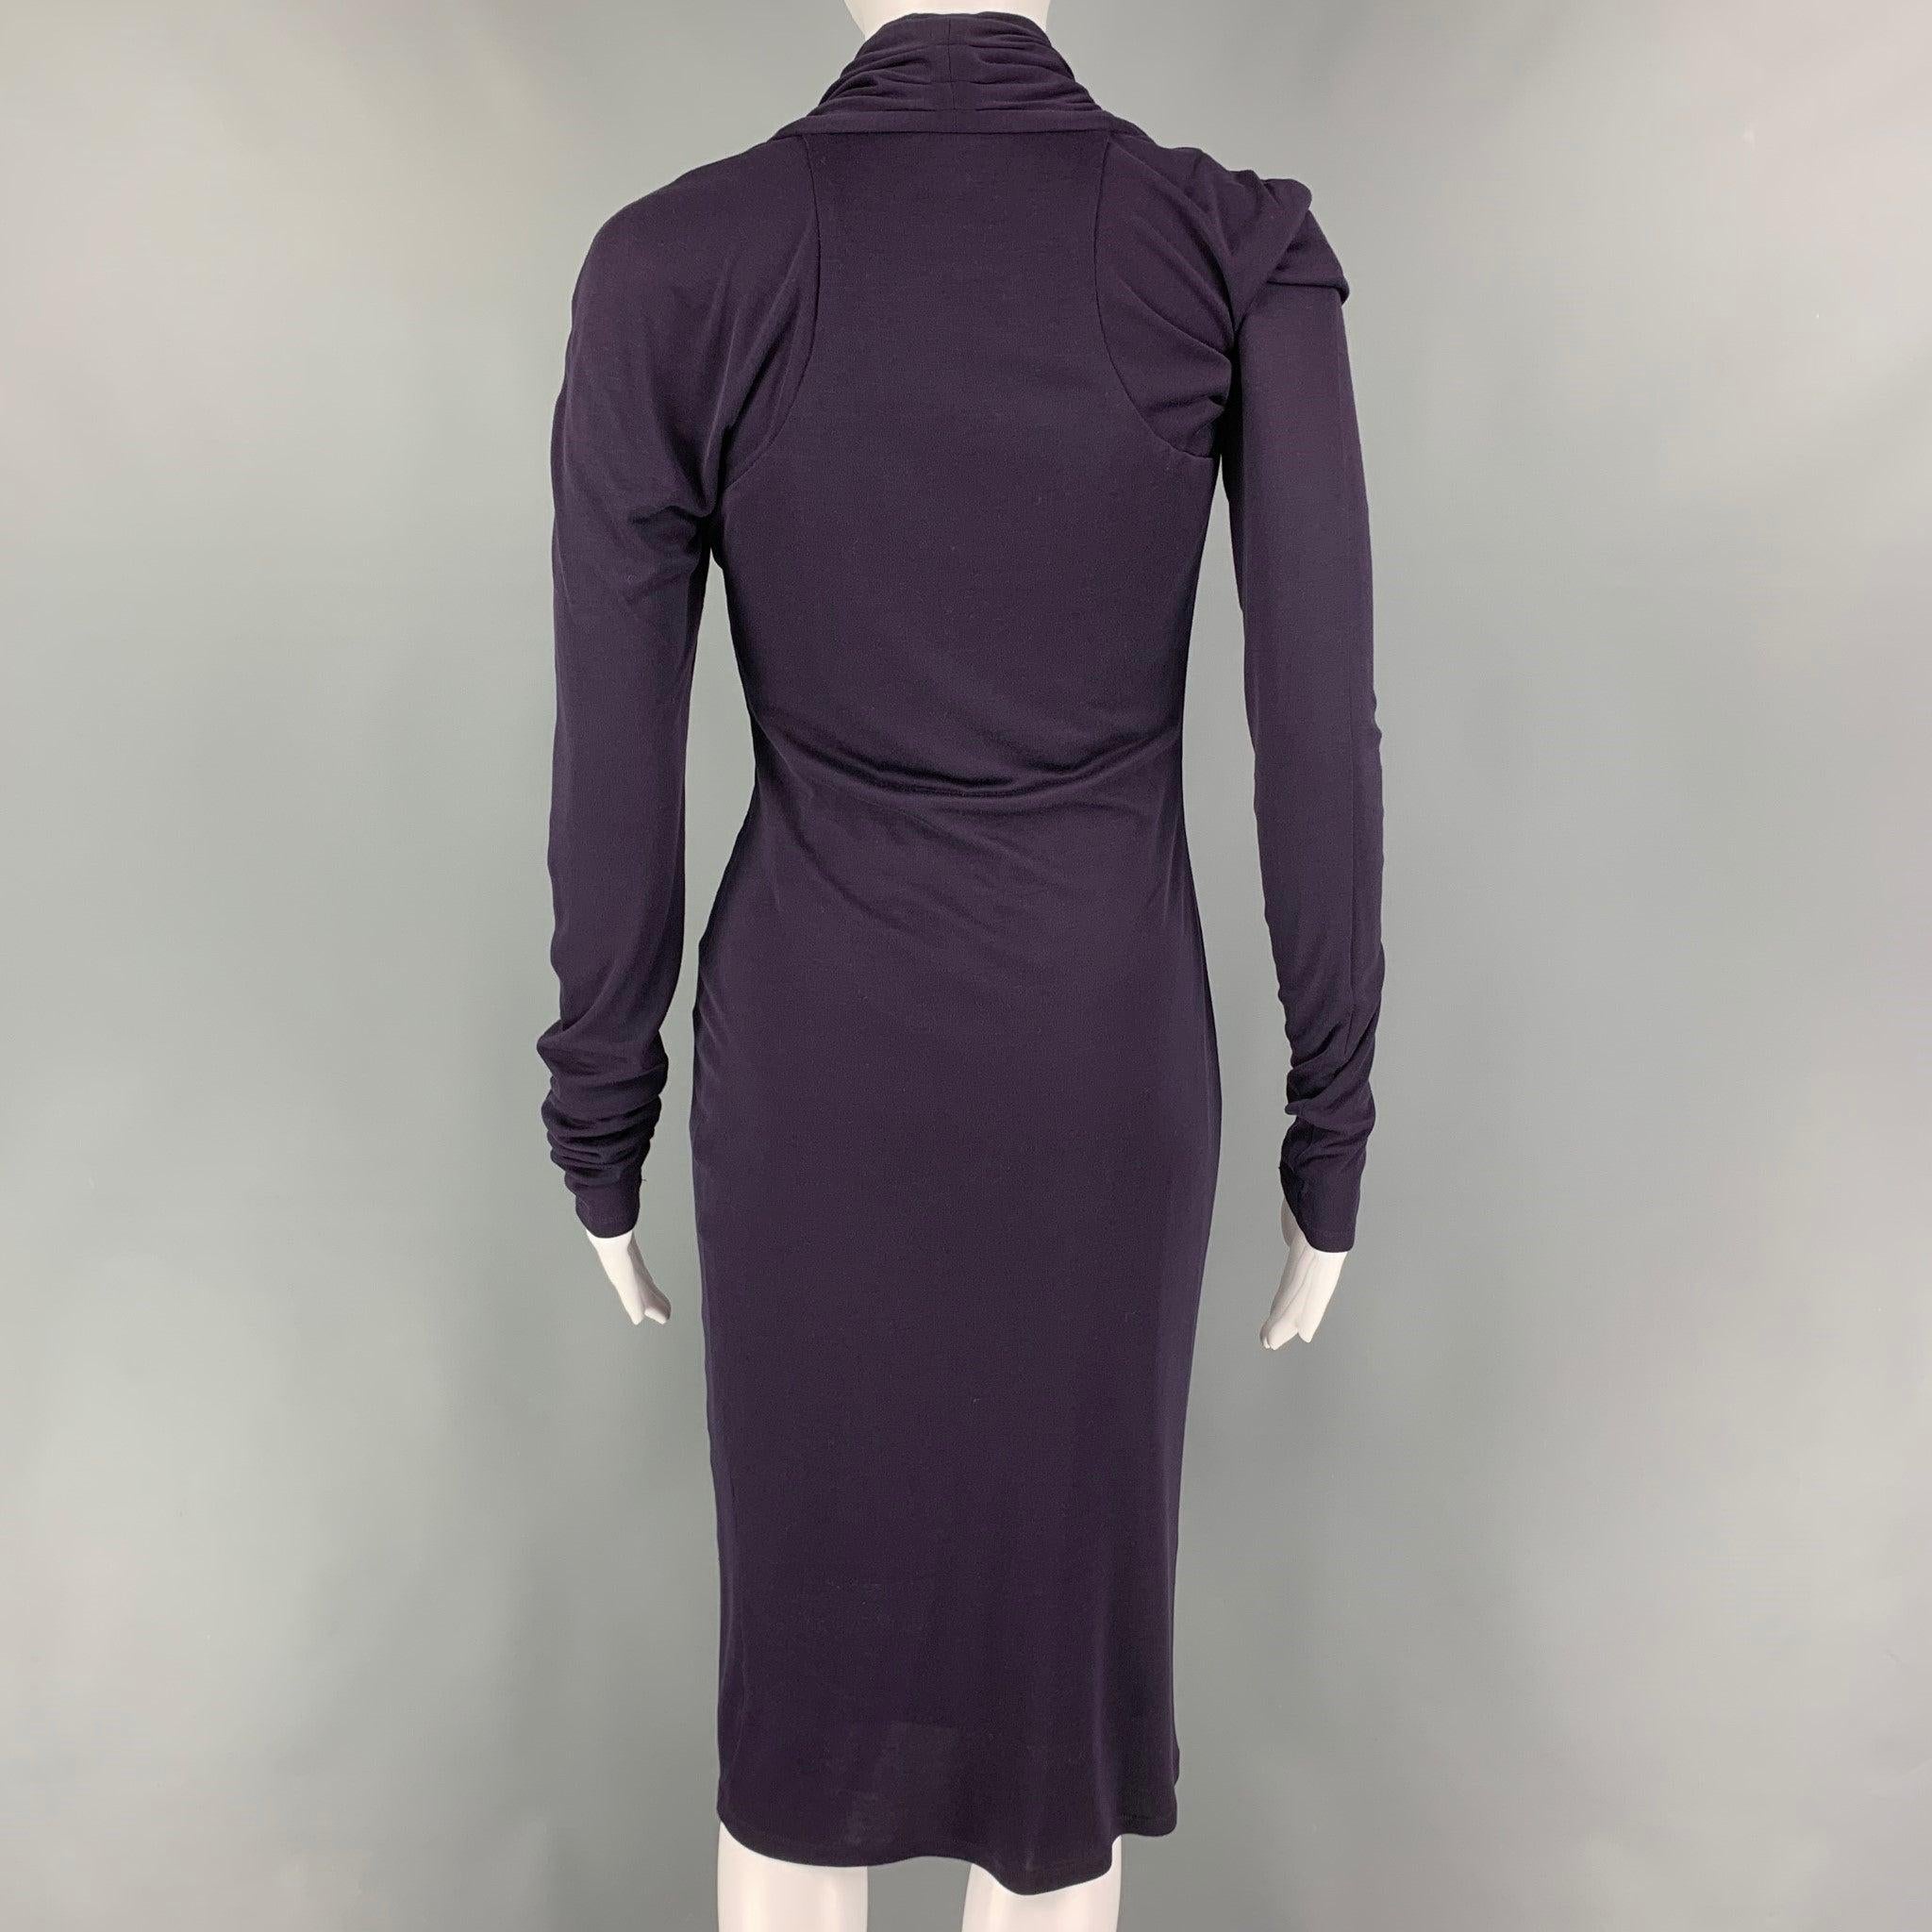 ALEXANDER MCQUEEN Size 6 Purple Viscose Long Sleeve Dress In Good Condition For Sale In San Francisco, CA